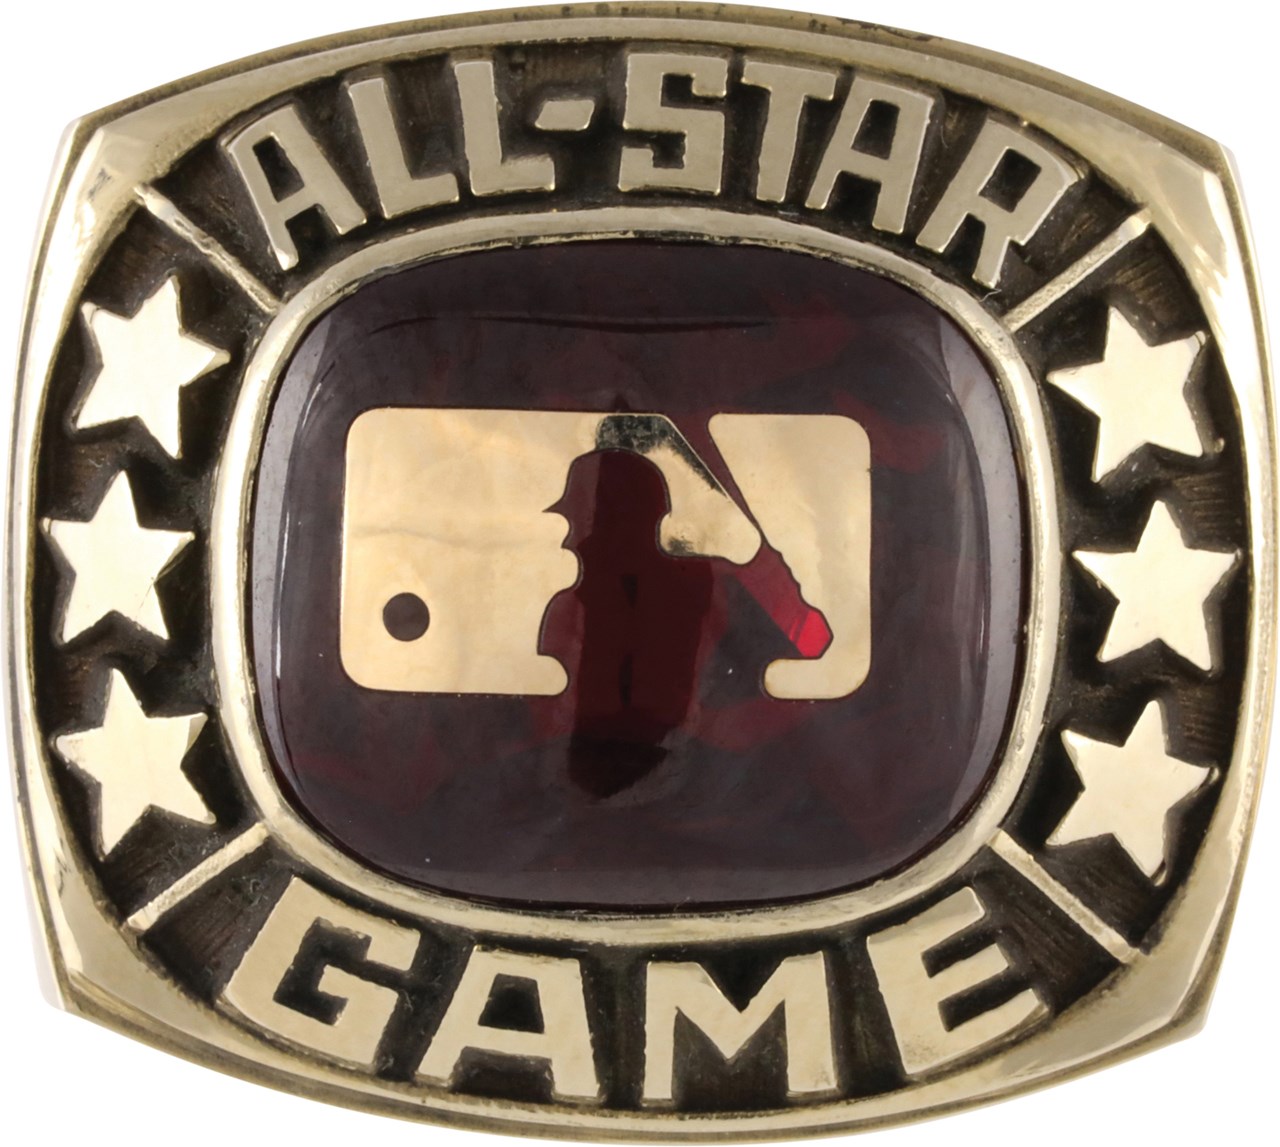 Sports Rings And Awards - 1985 MLB All-Star Game Ring